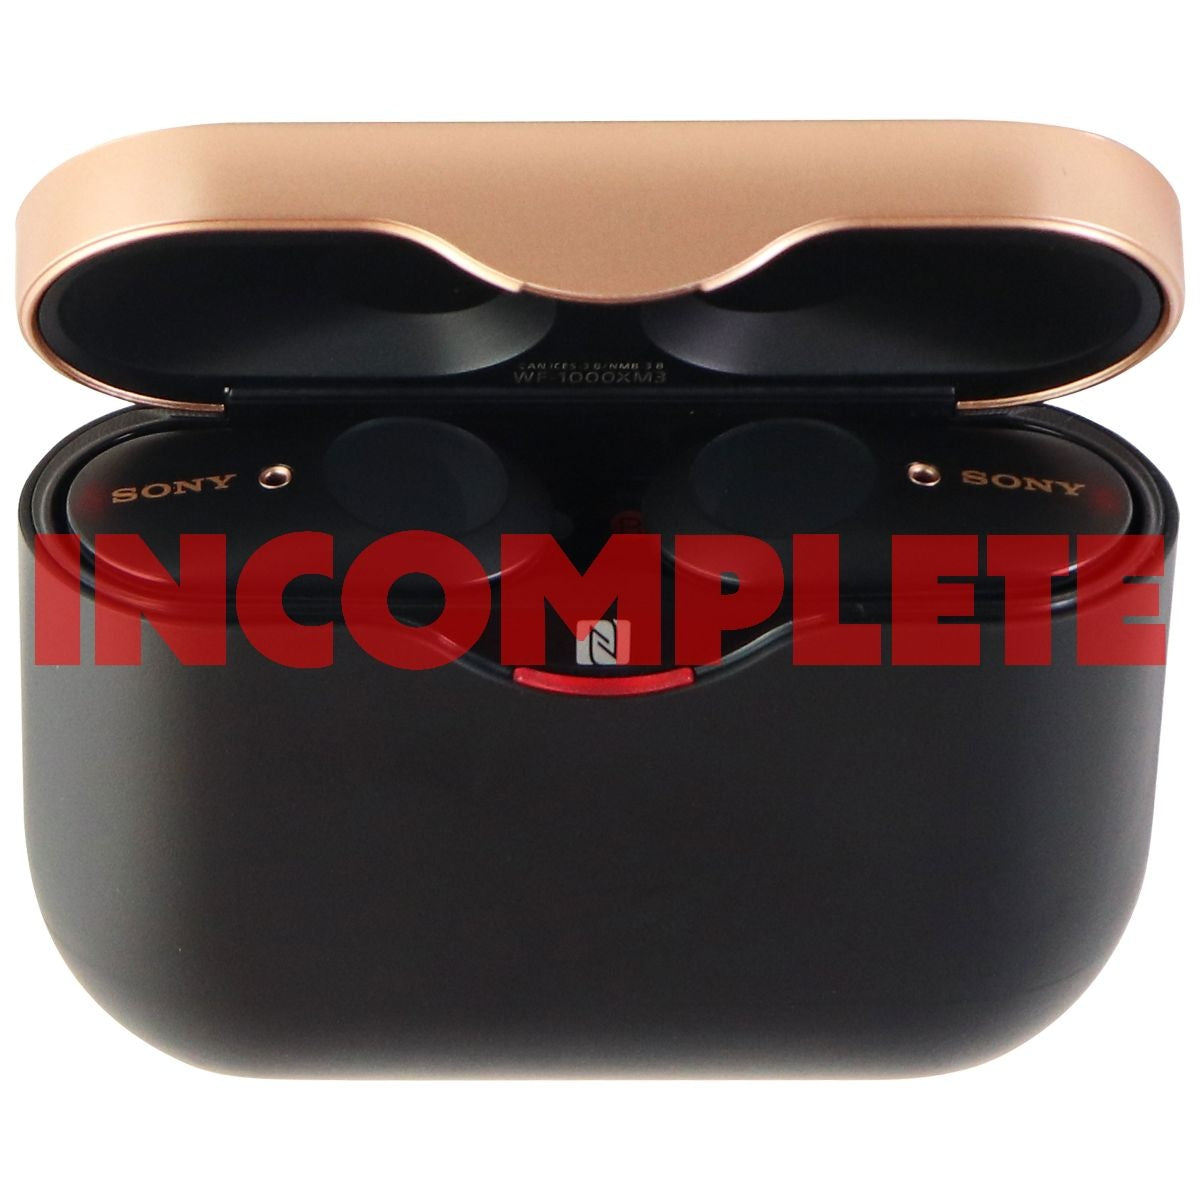 Sony WF-1000XM3 Noise Canceling Wireless Earbuds & Charge Case - Black Portable Audio - Headphones Sony    - Simple Cell Bulk Wholesale Pricing - USA Seller